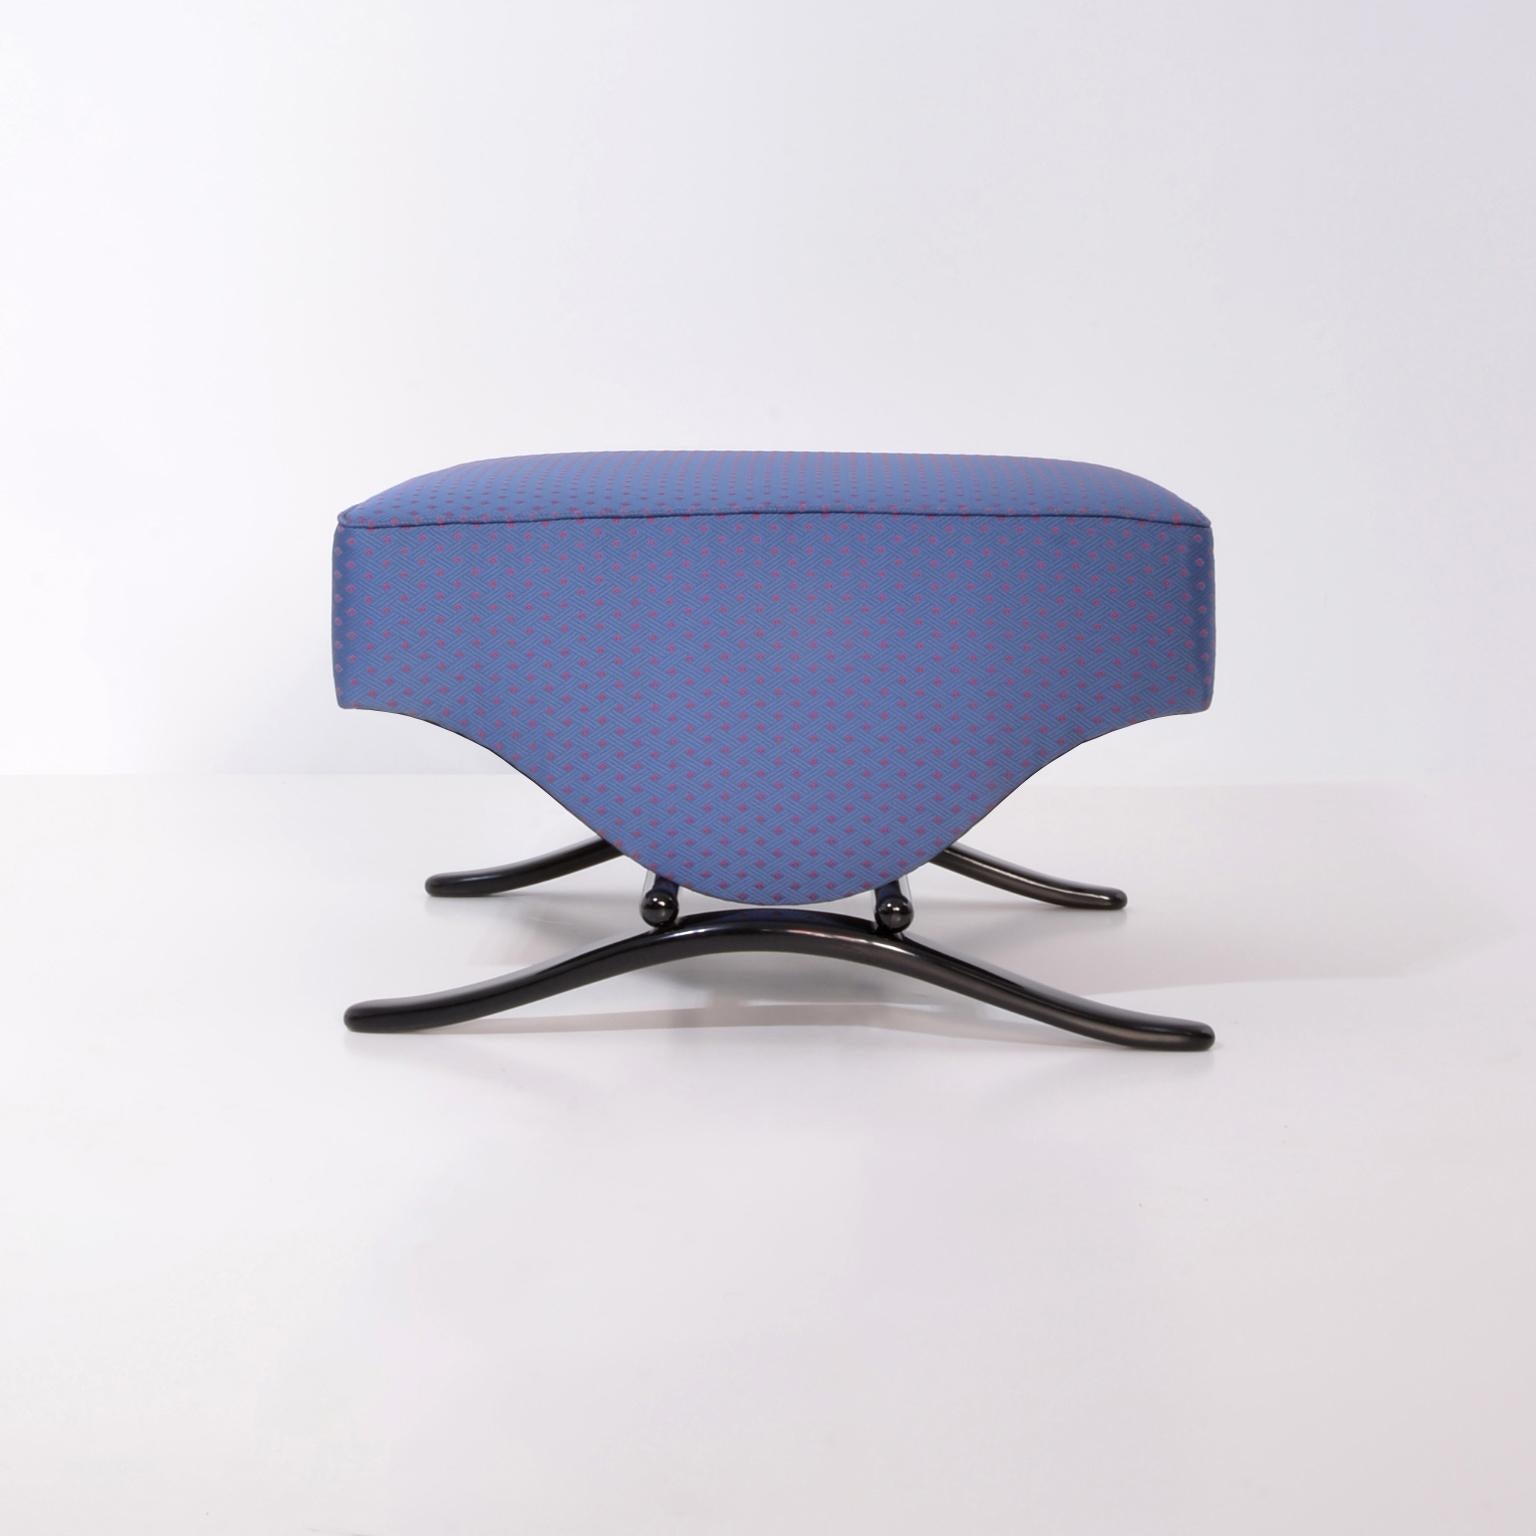 German Bespoke Modernist Stool, High Gloss Lacquered Wood, Fabric Upholstery For Sale